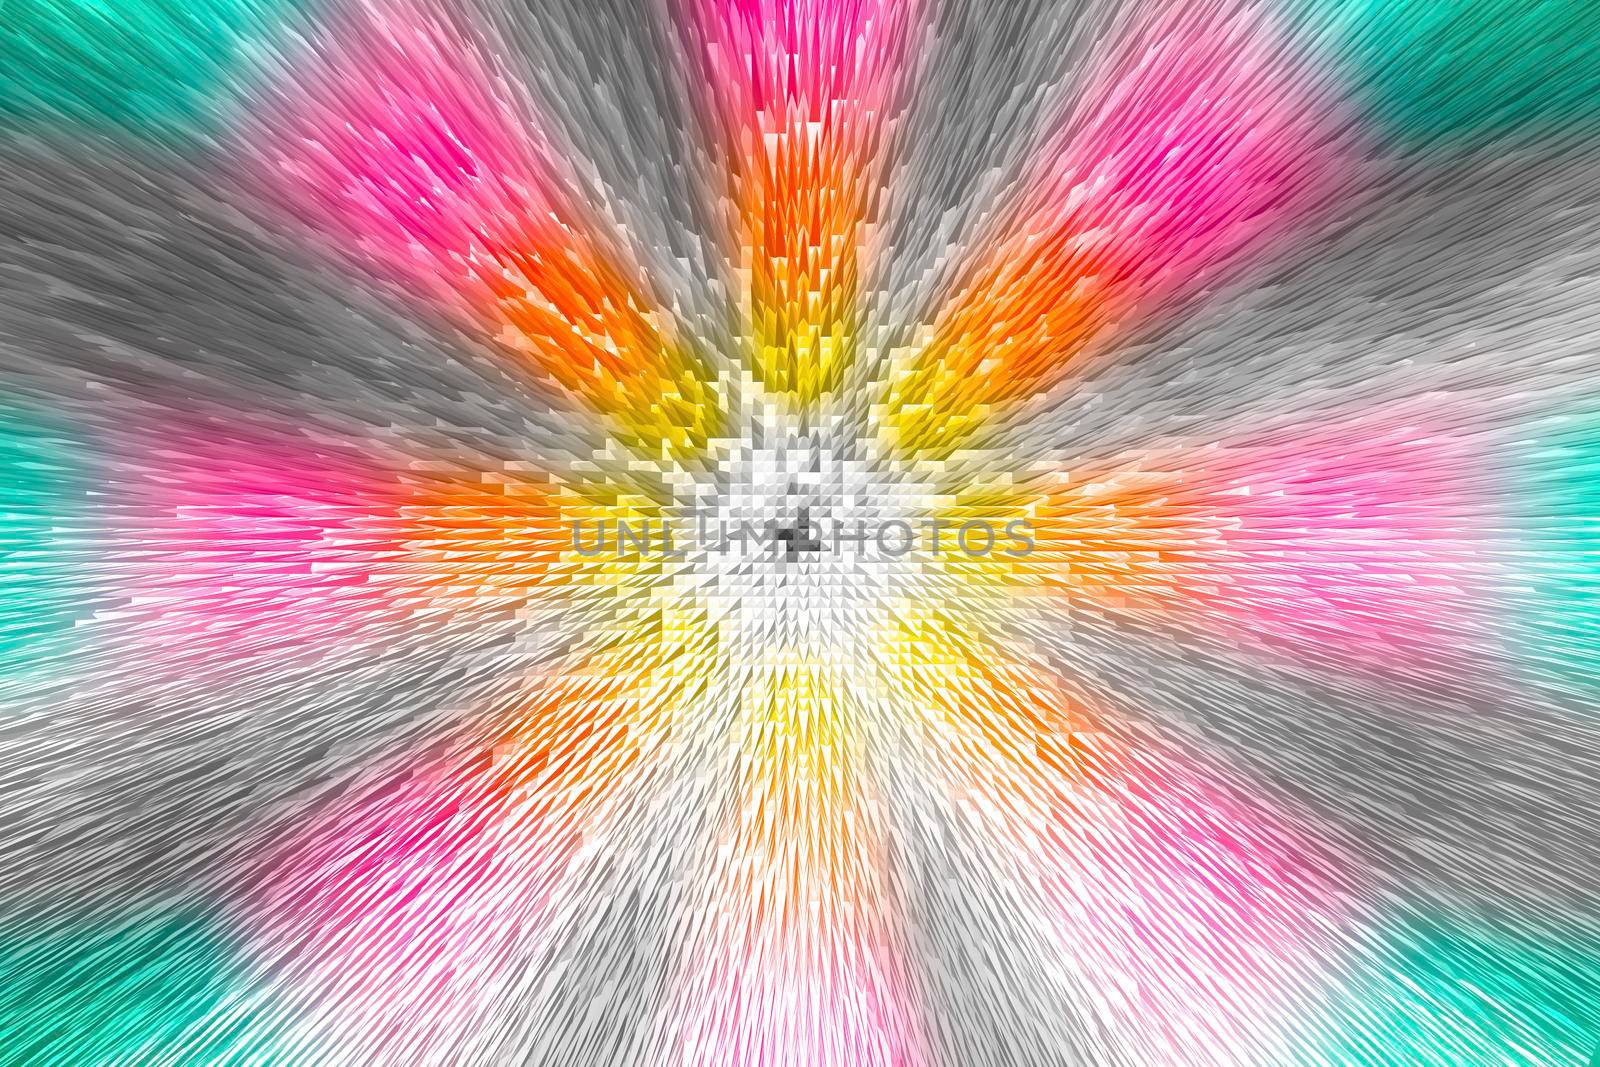 White, grey, blue, pink, orange and yellow radial pattern with effect